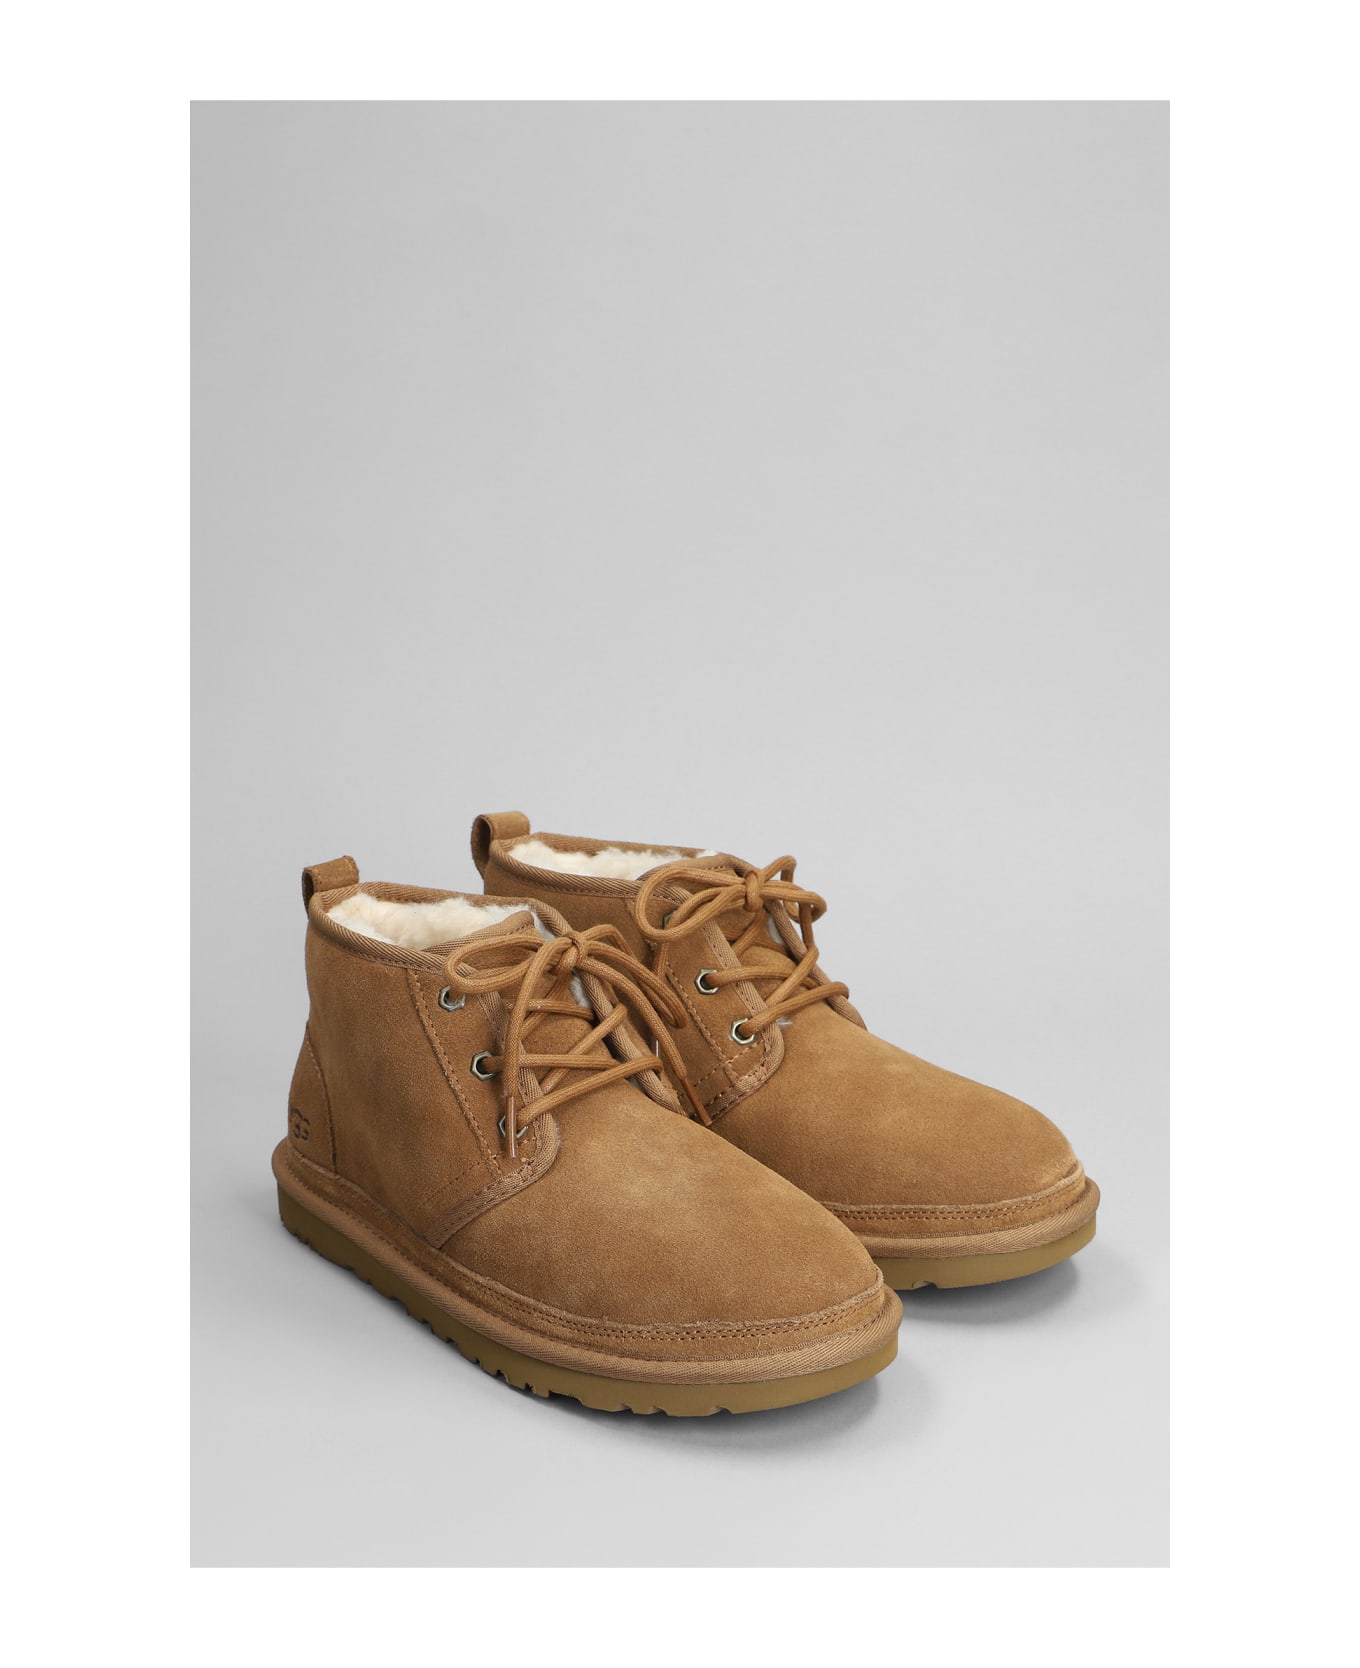 UGG Neumel Lace Up Shoes In Leather Color Suede - leather color ブーツ